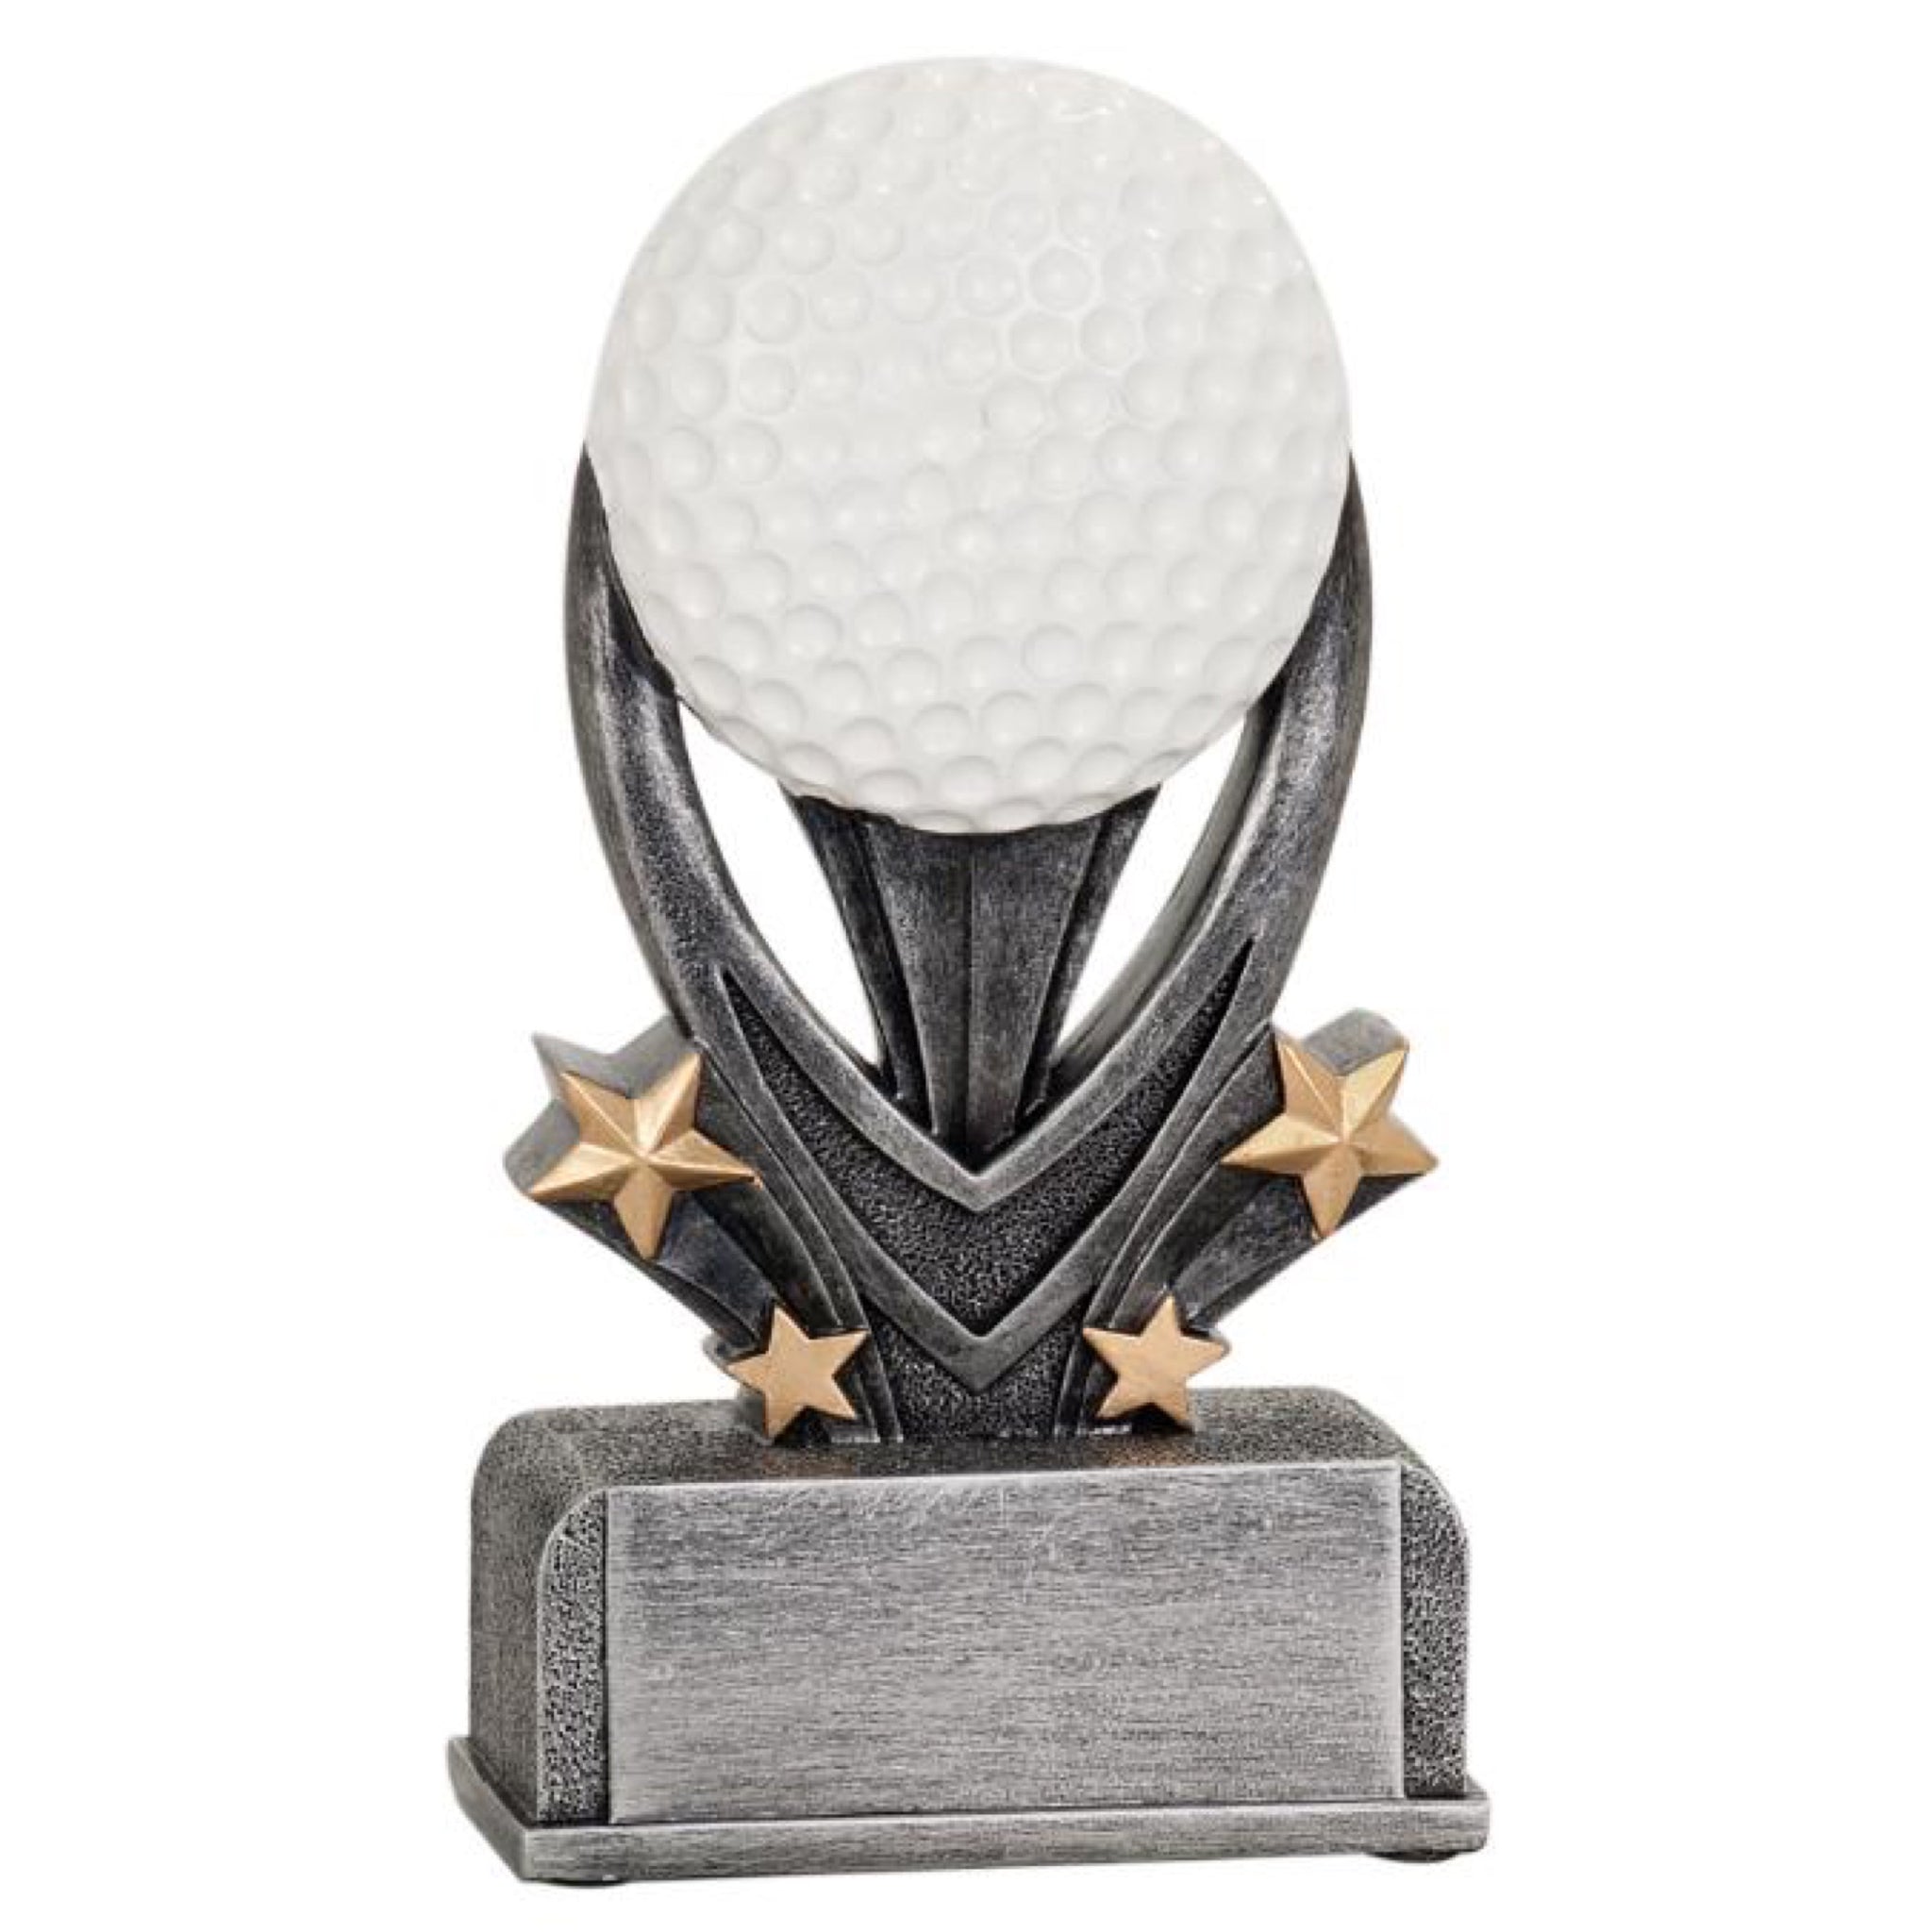 Golf resin featuring a silver rectangle base with a silver golf tee sitting on top. Two gold stars shoot out diagonally from each side. On top of the silver tee sits a large textured white golf ball.